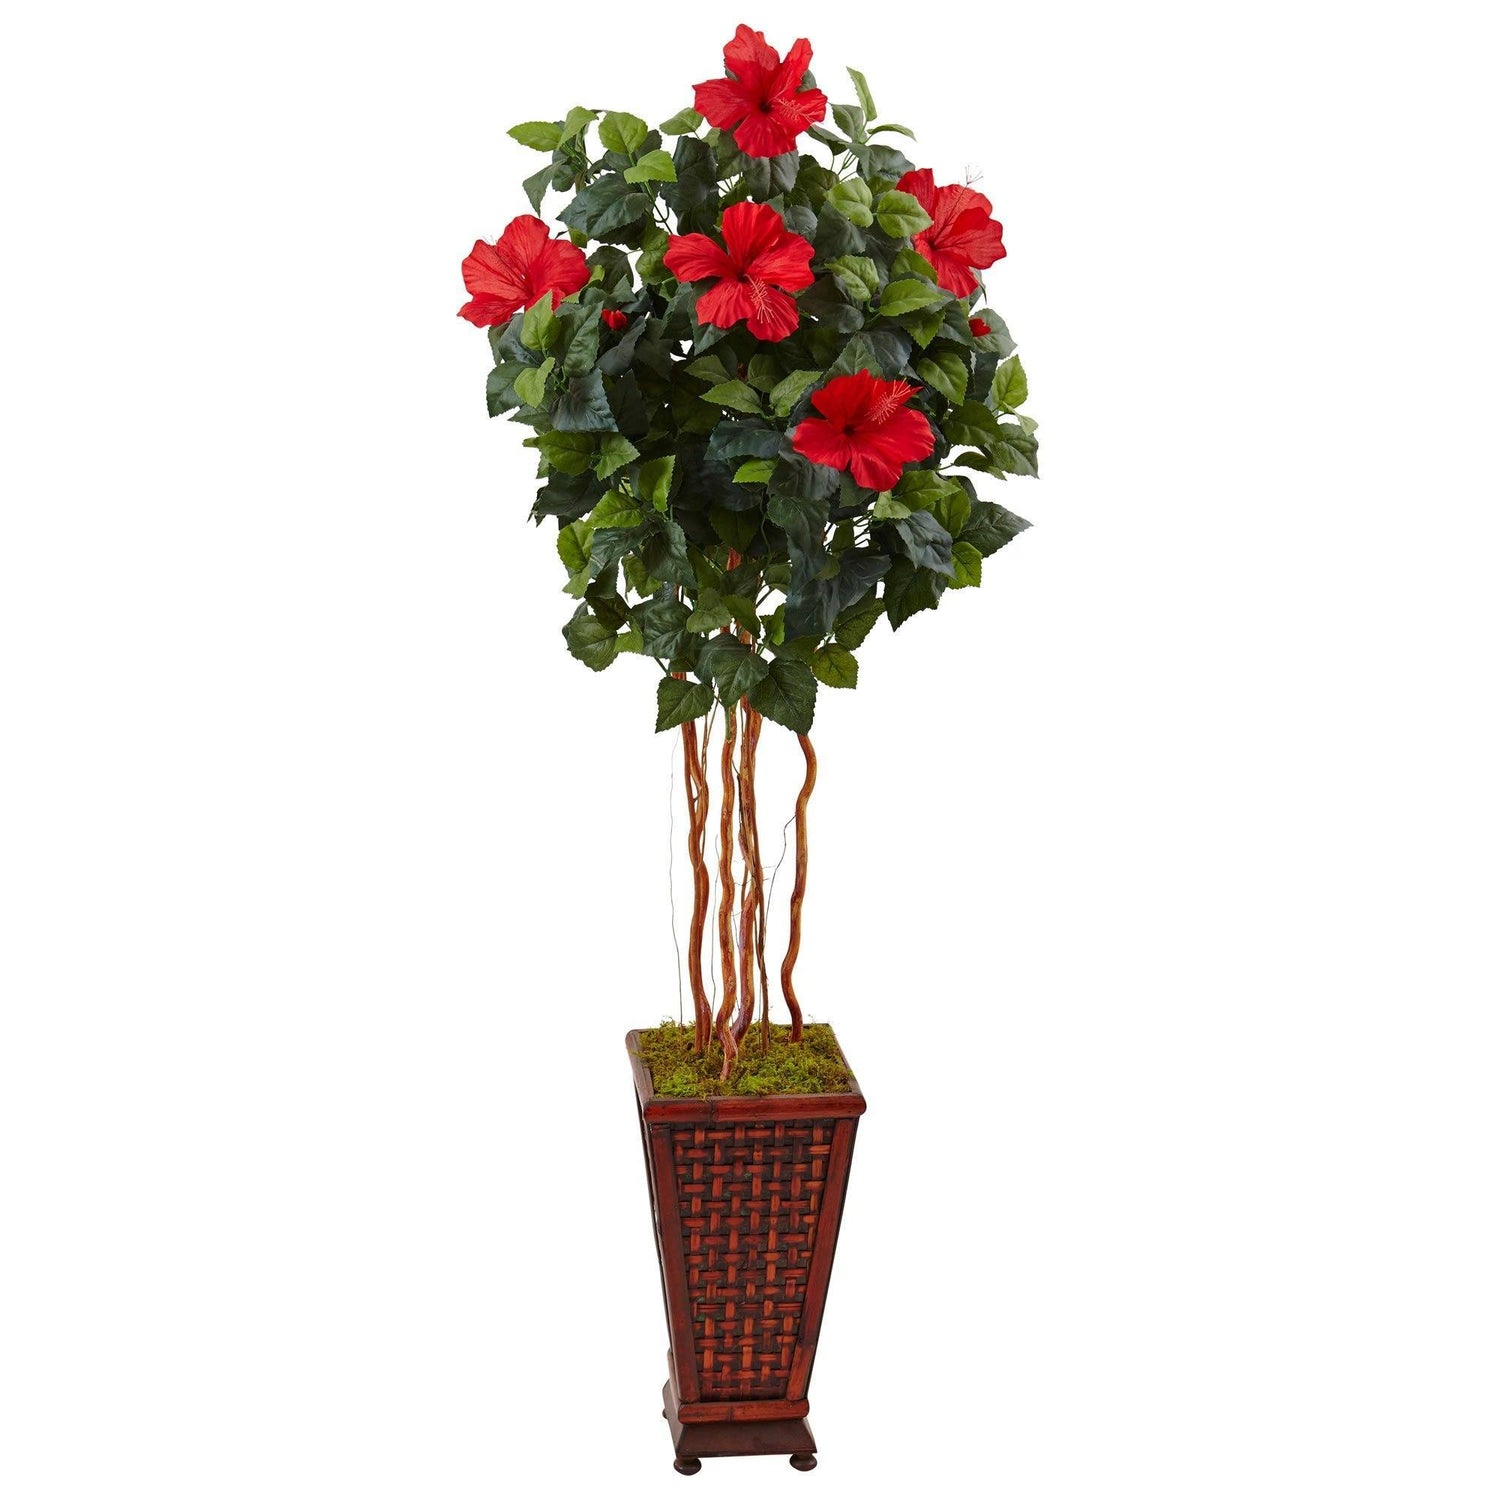 5’ Hibiscus Tree in Decorated Wooden Planter